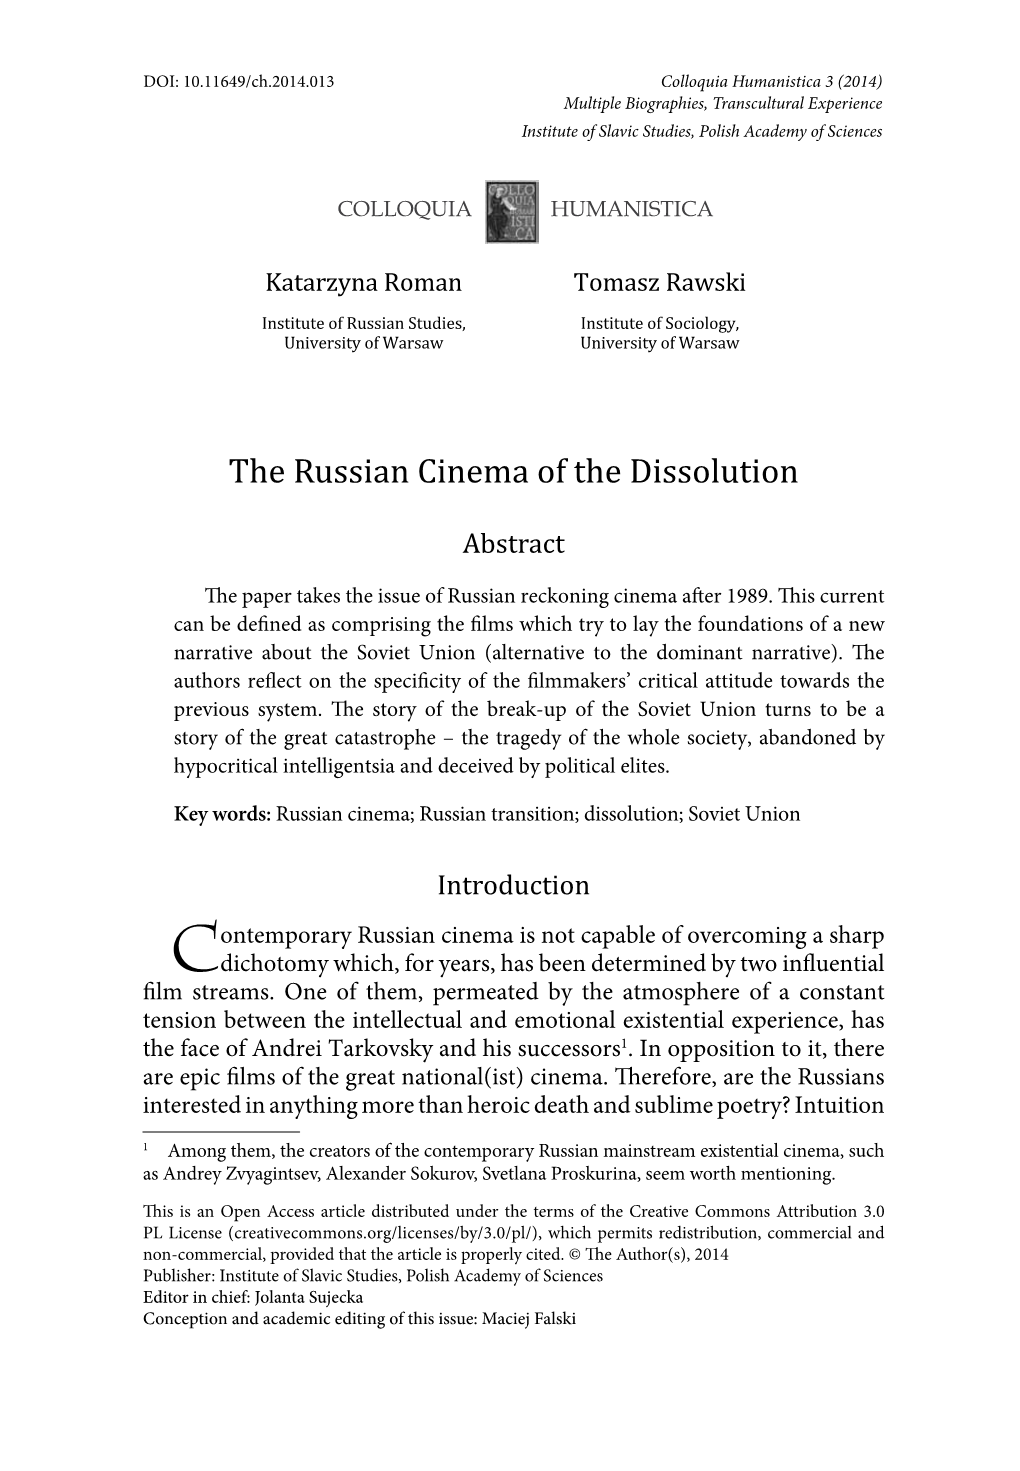 The Russian Cinema of the Dissolution